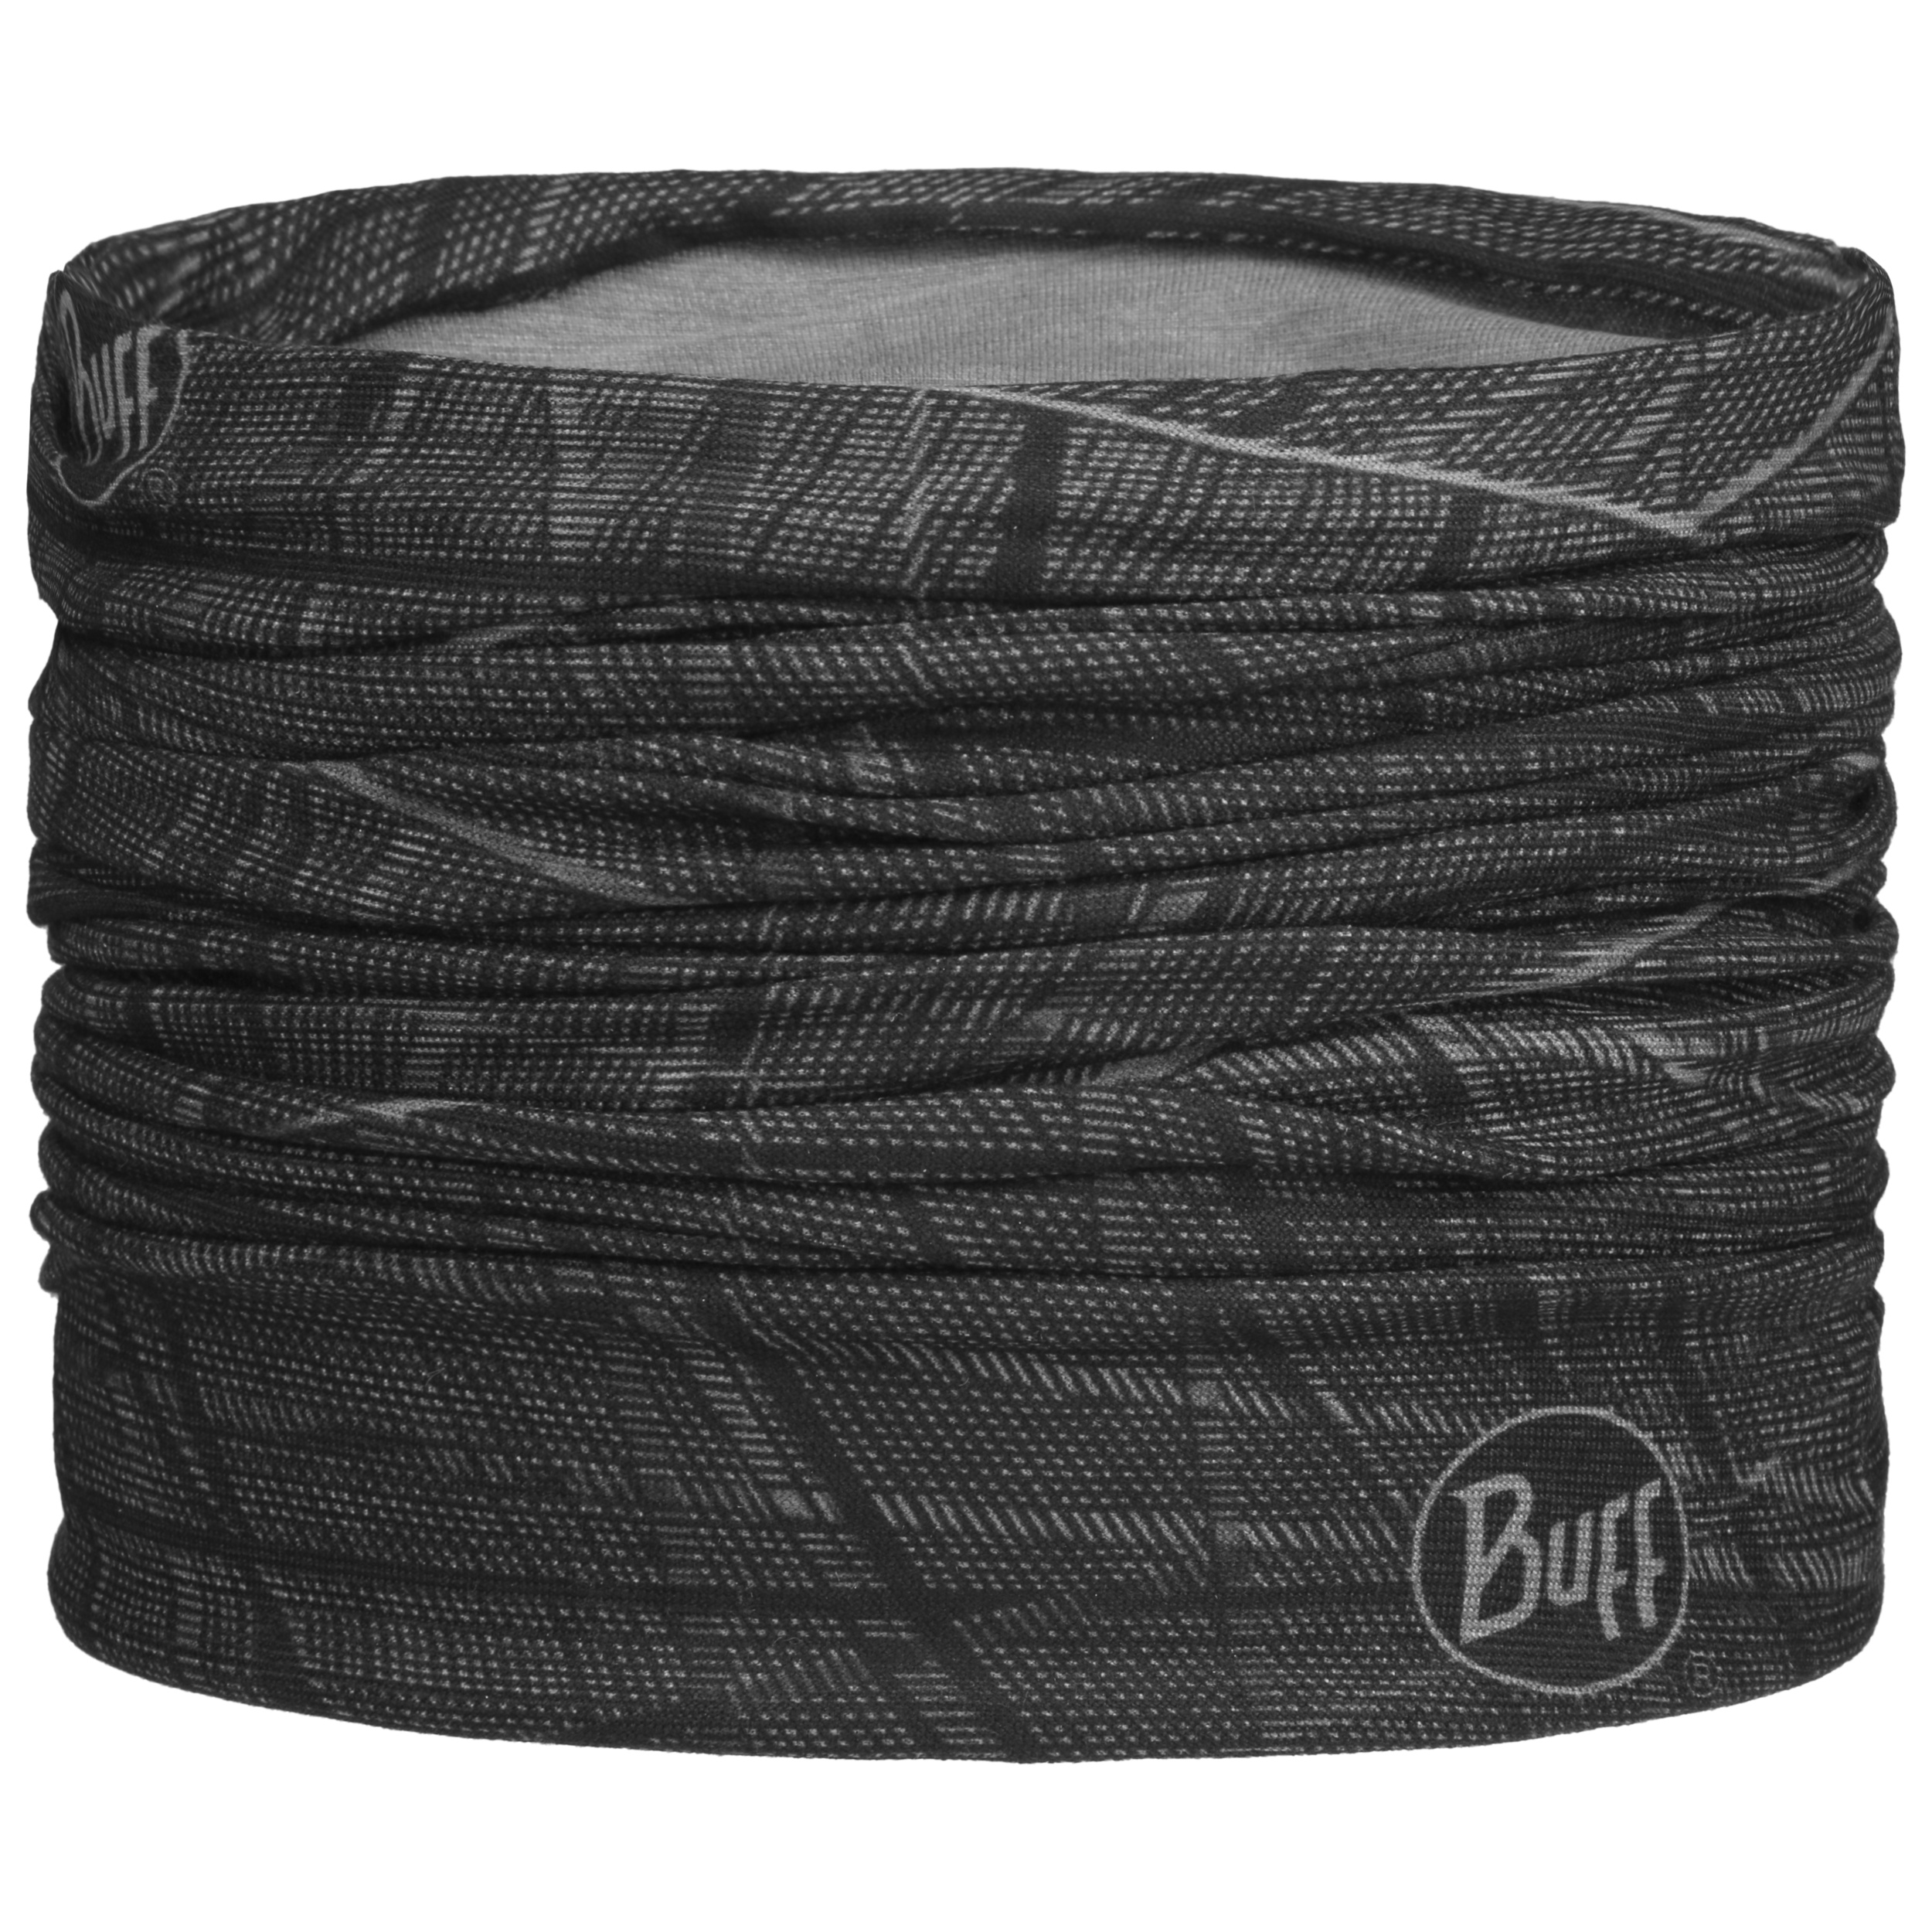 Embers Black Multifunktionstuch by - 14,95 BUFF €